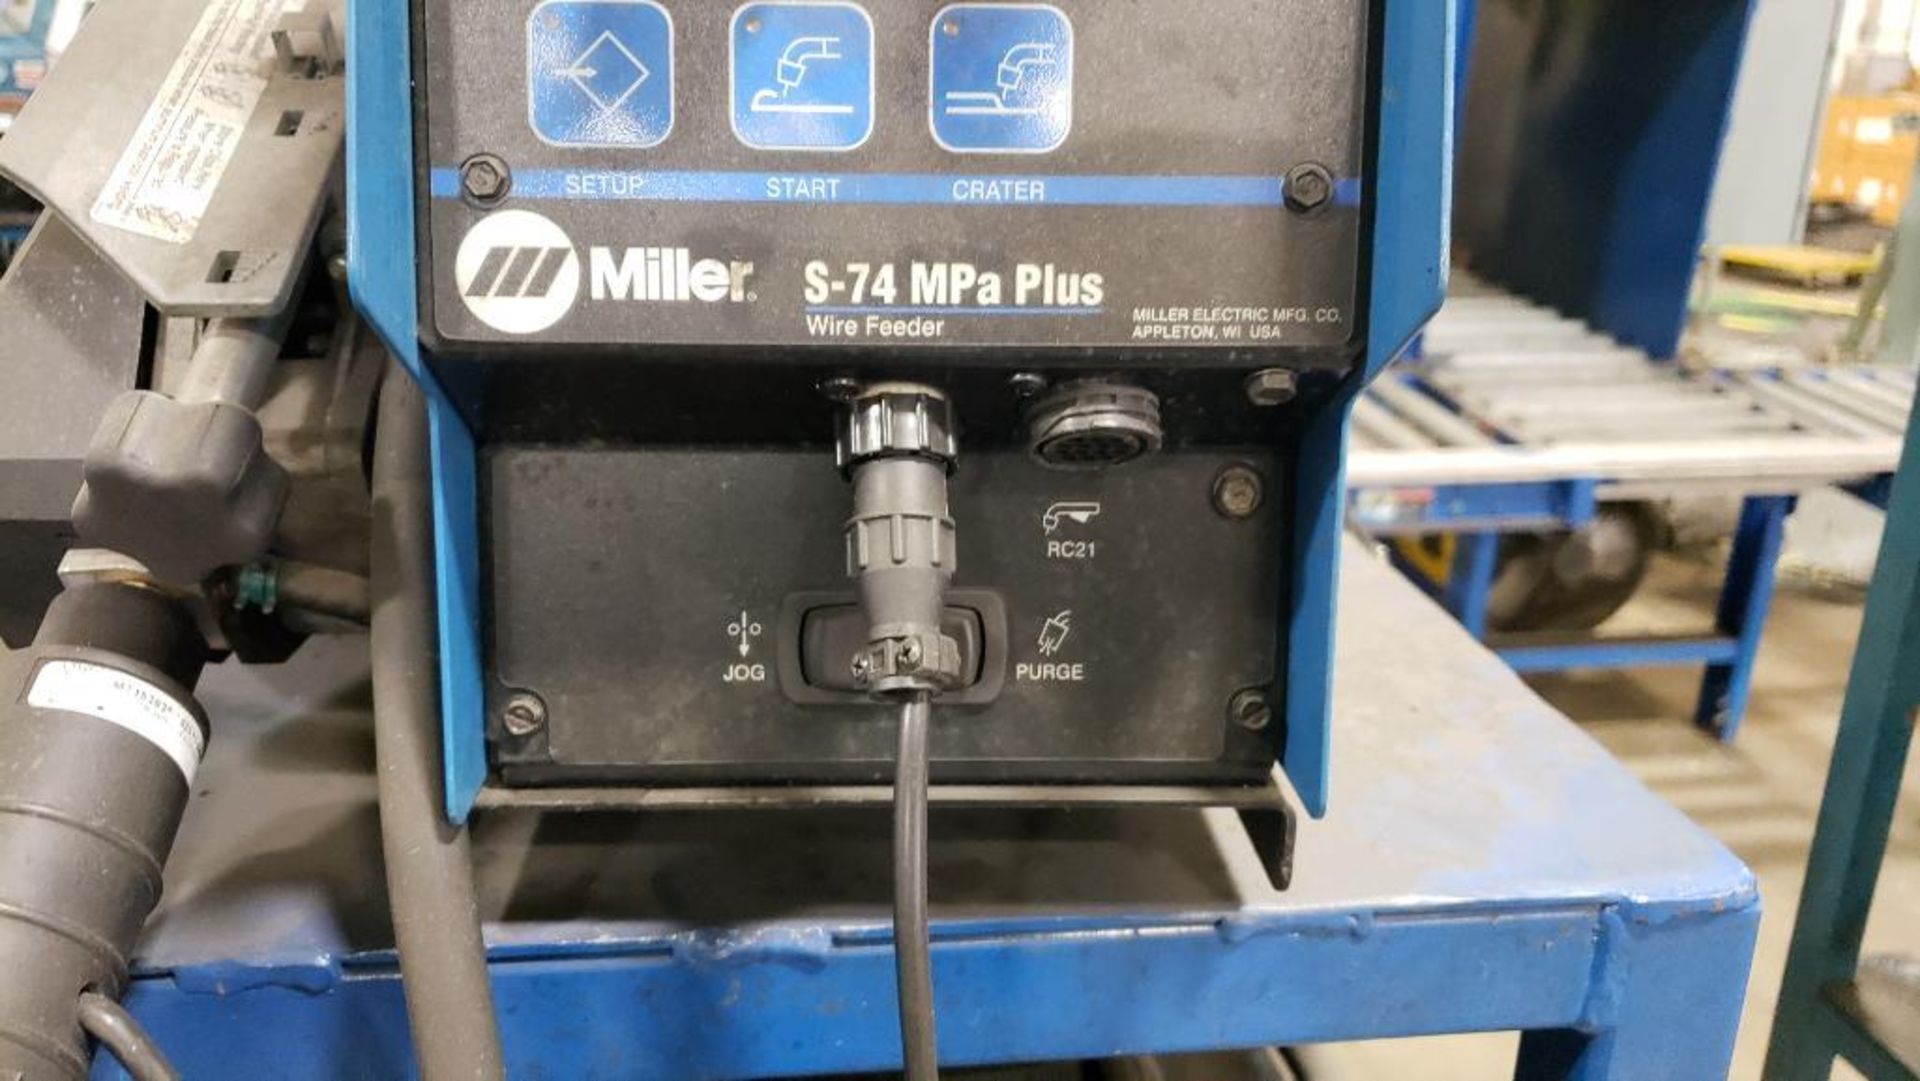 Miller Invision 352 MPa auto-line w/ Miller S-74 MPa Plus wire feeder welding system. - Image 7 of 15